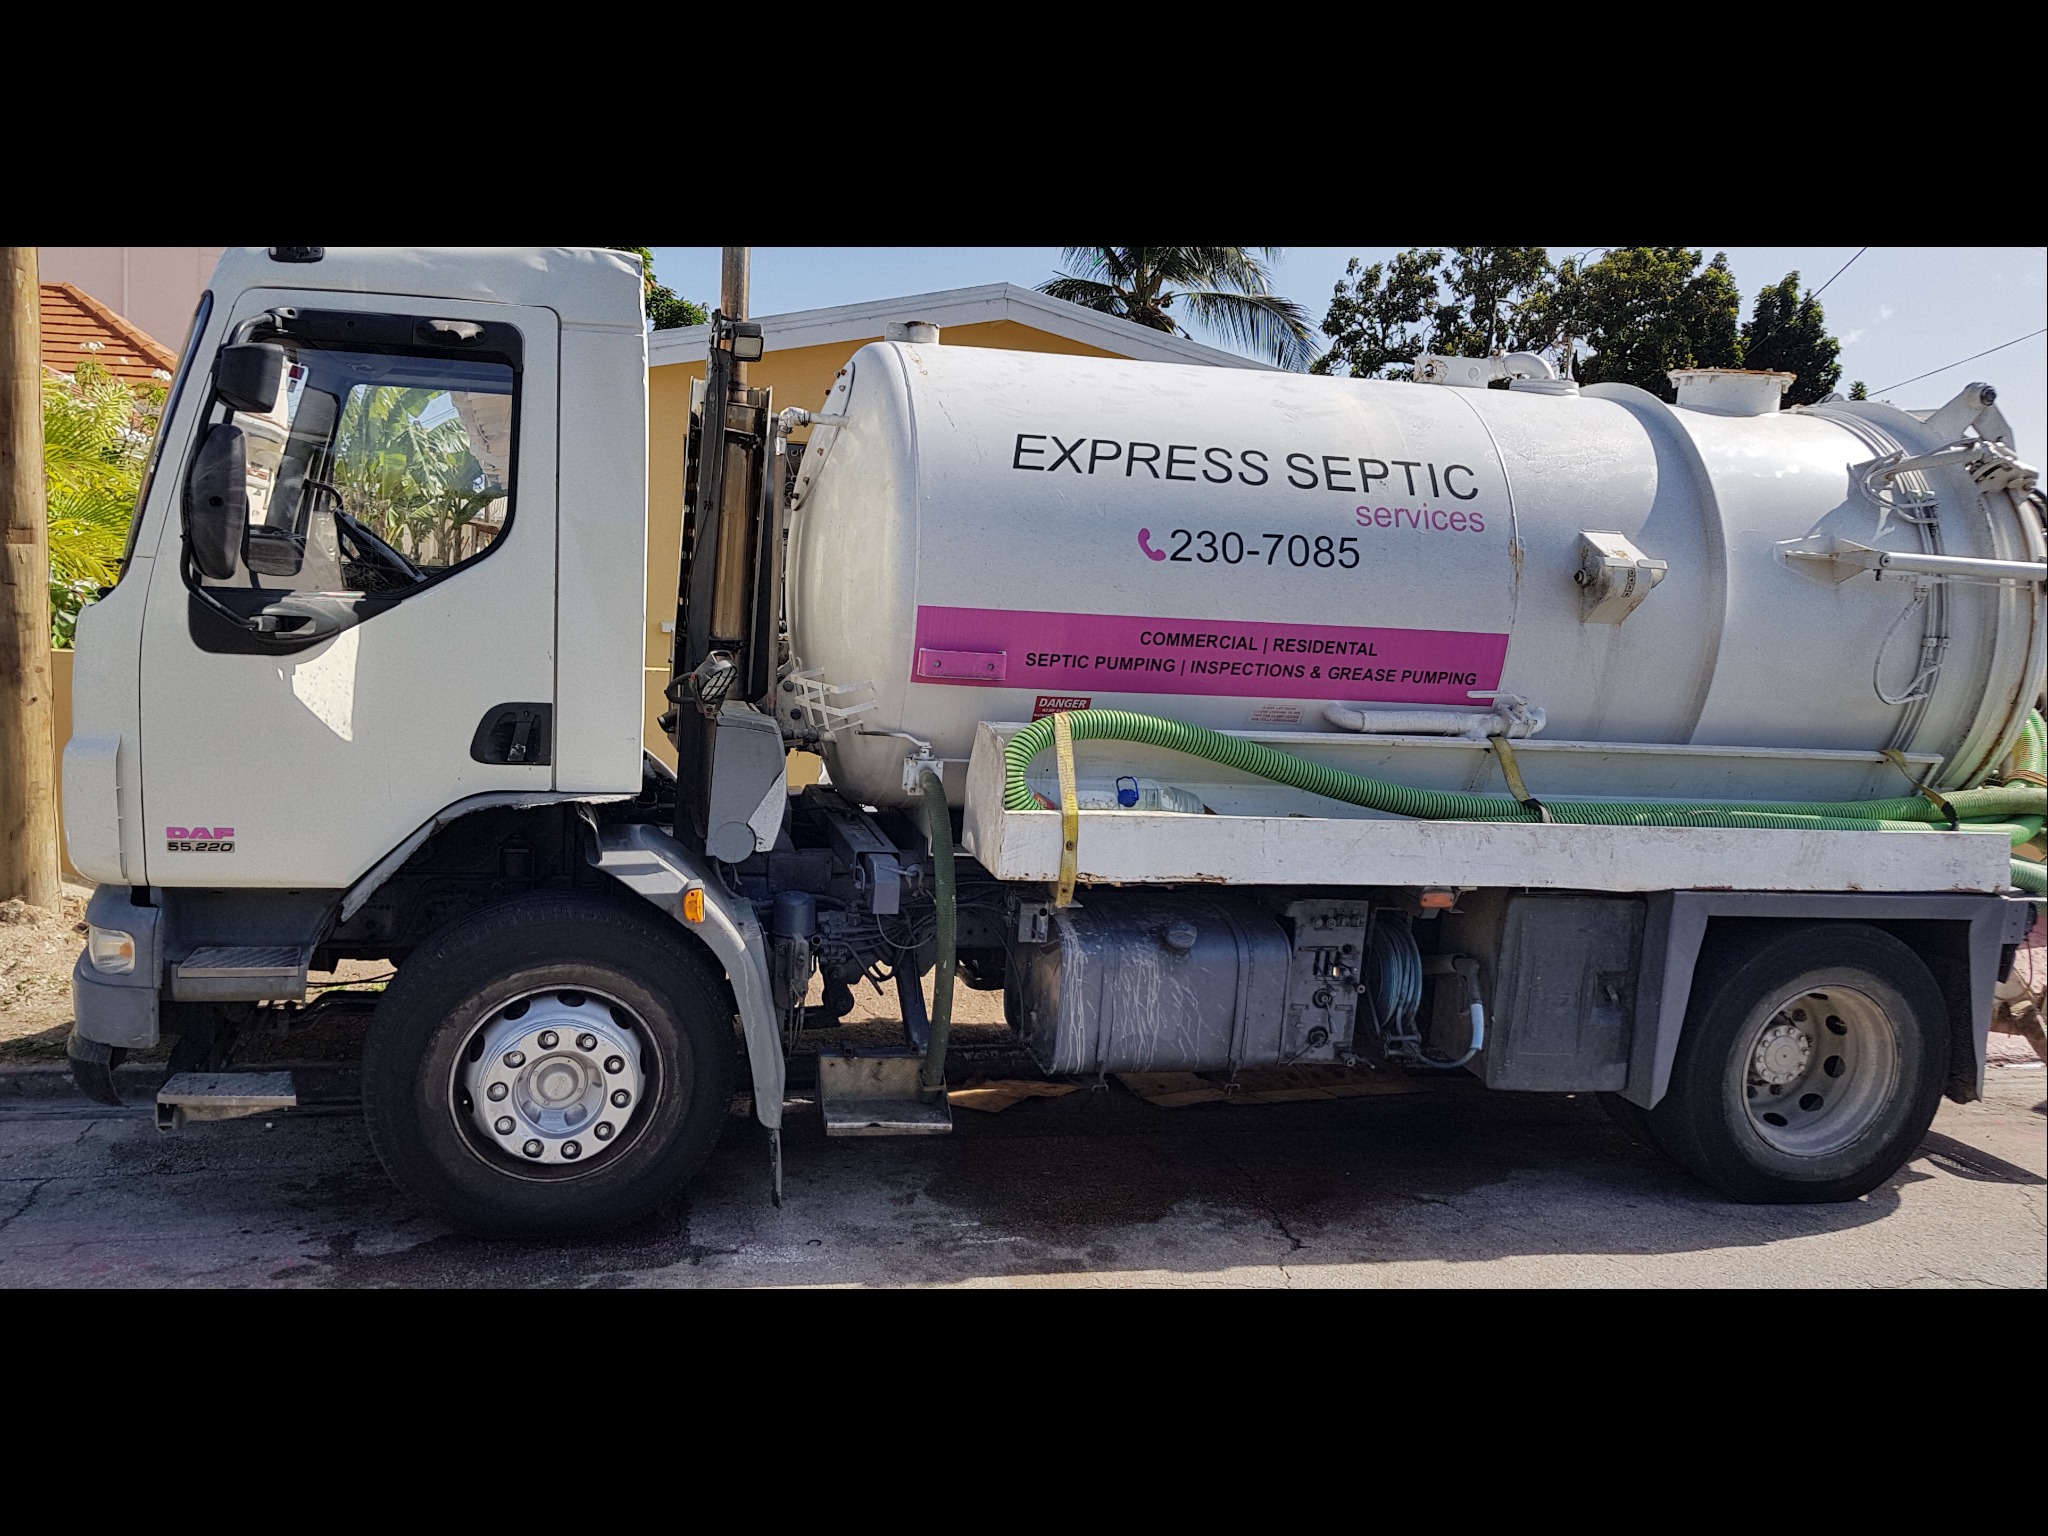 Express Skip Services - Septic Tanks & Systems Cleaning